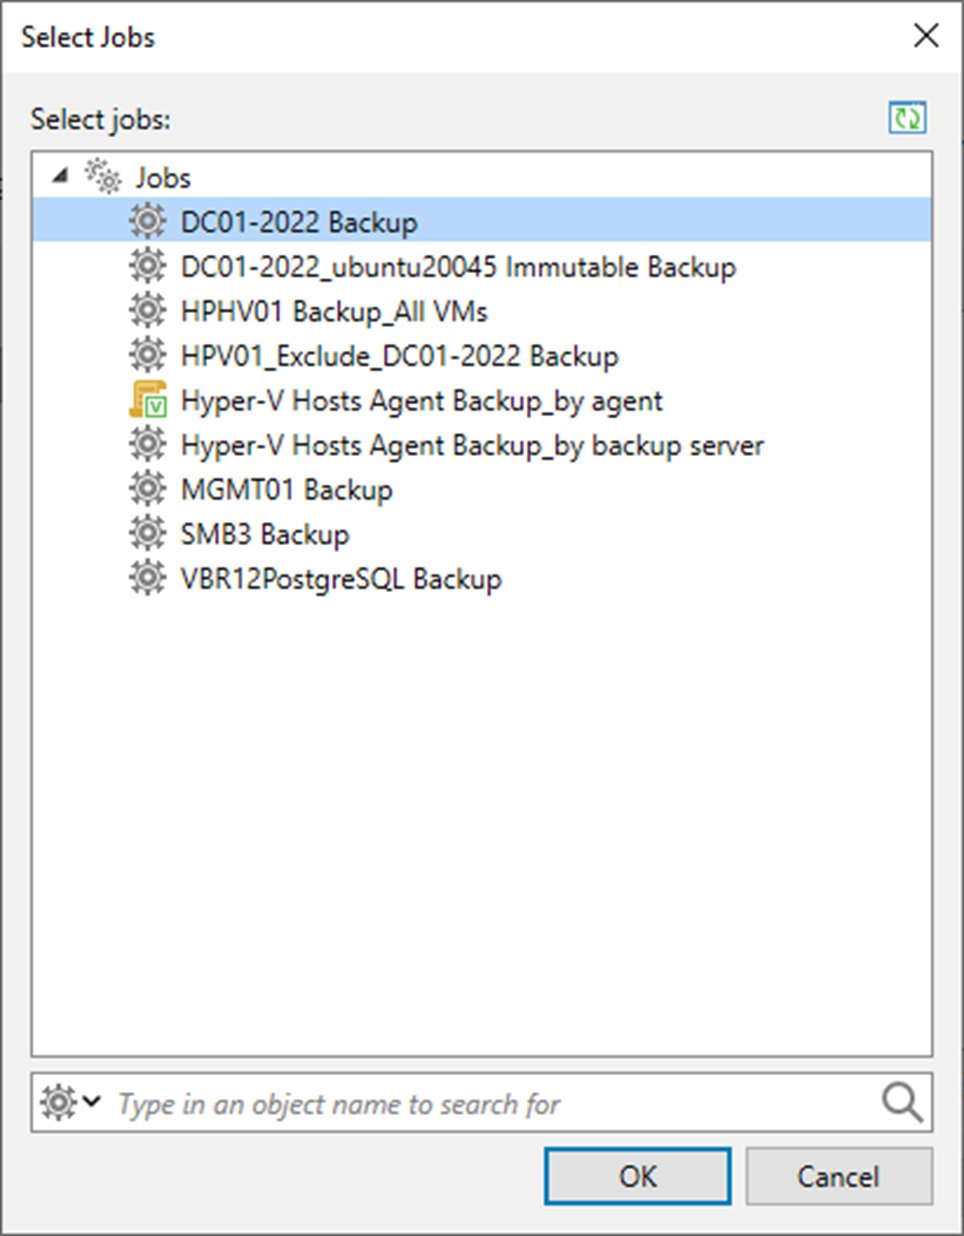 092423 0437 Howtocreate6 - How to create a Backup Copy Job with Immediate copy from the backup job workload at Veeam Backup and Replication v12